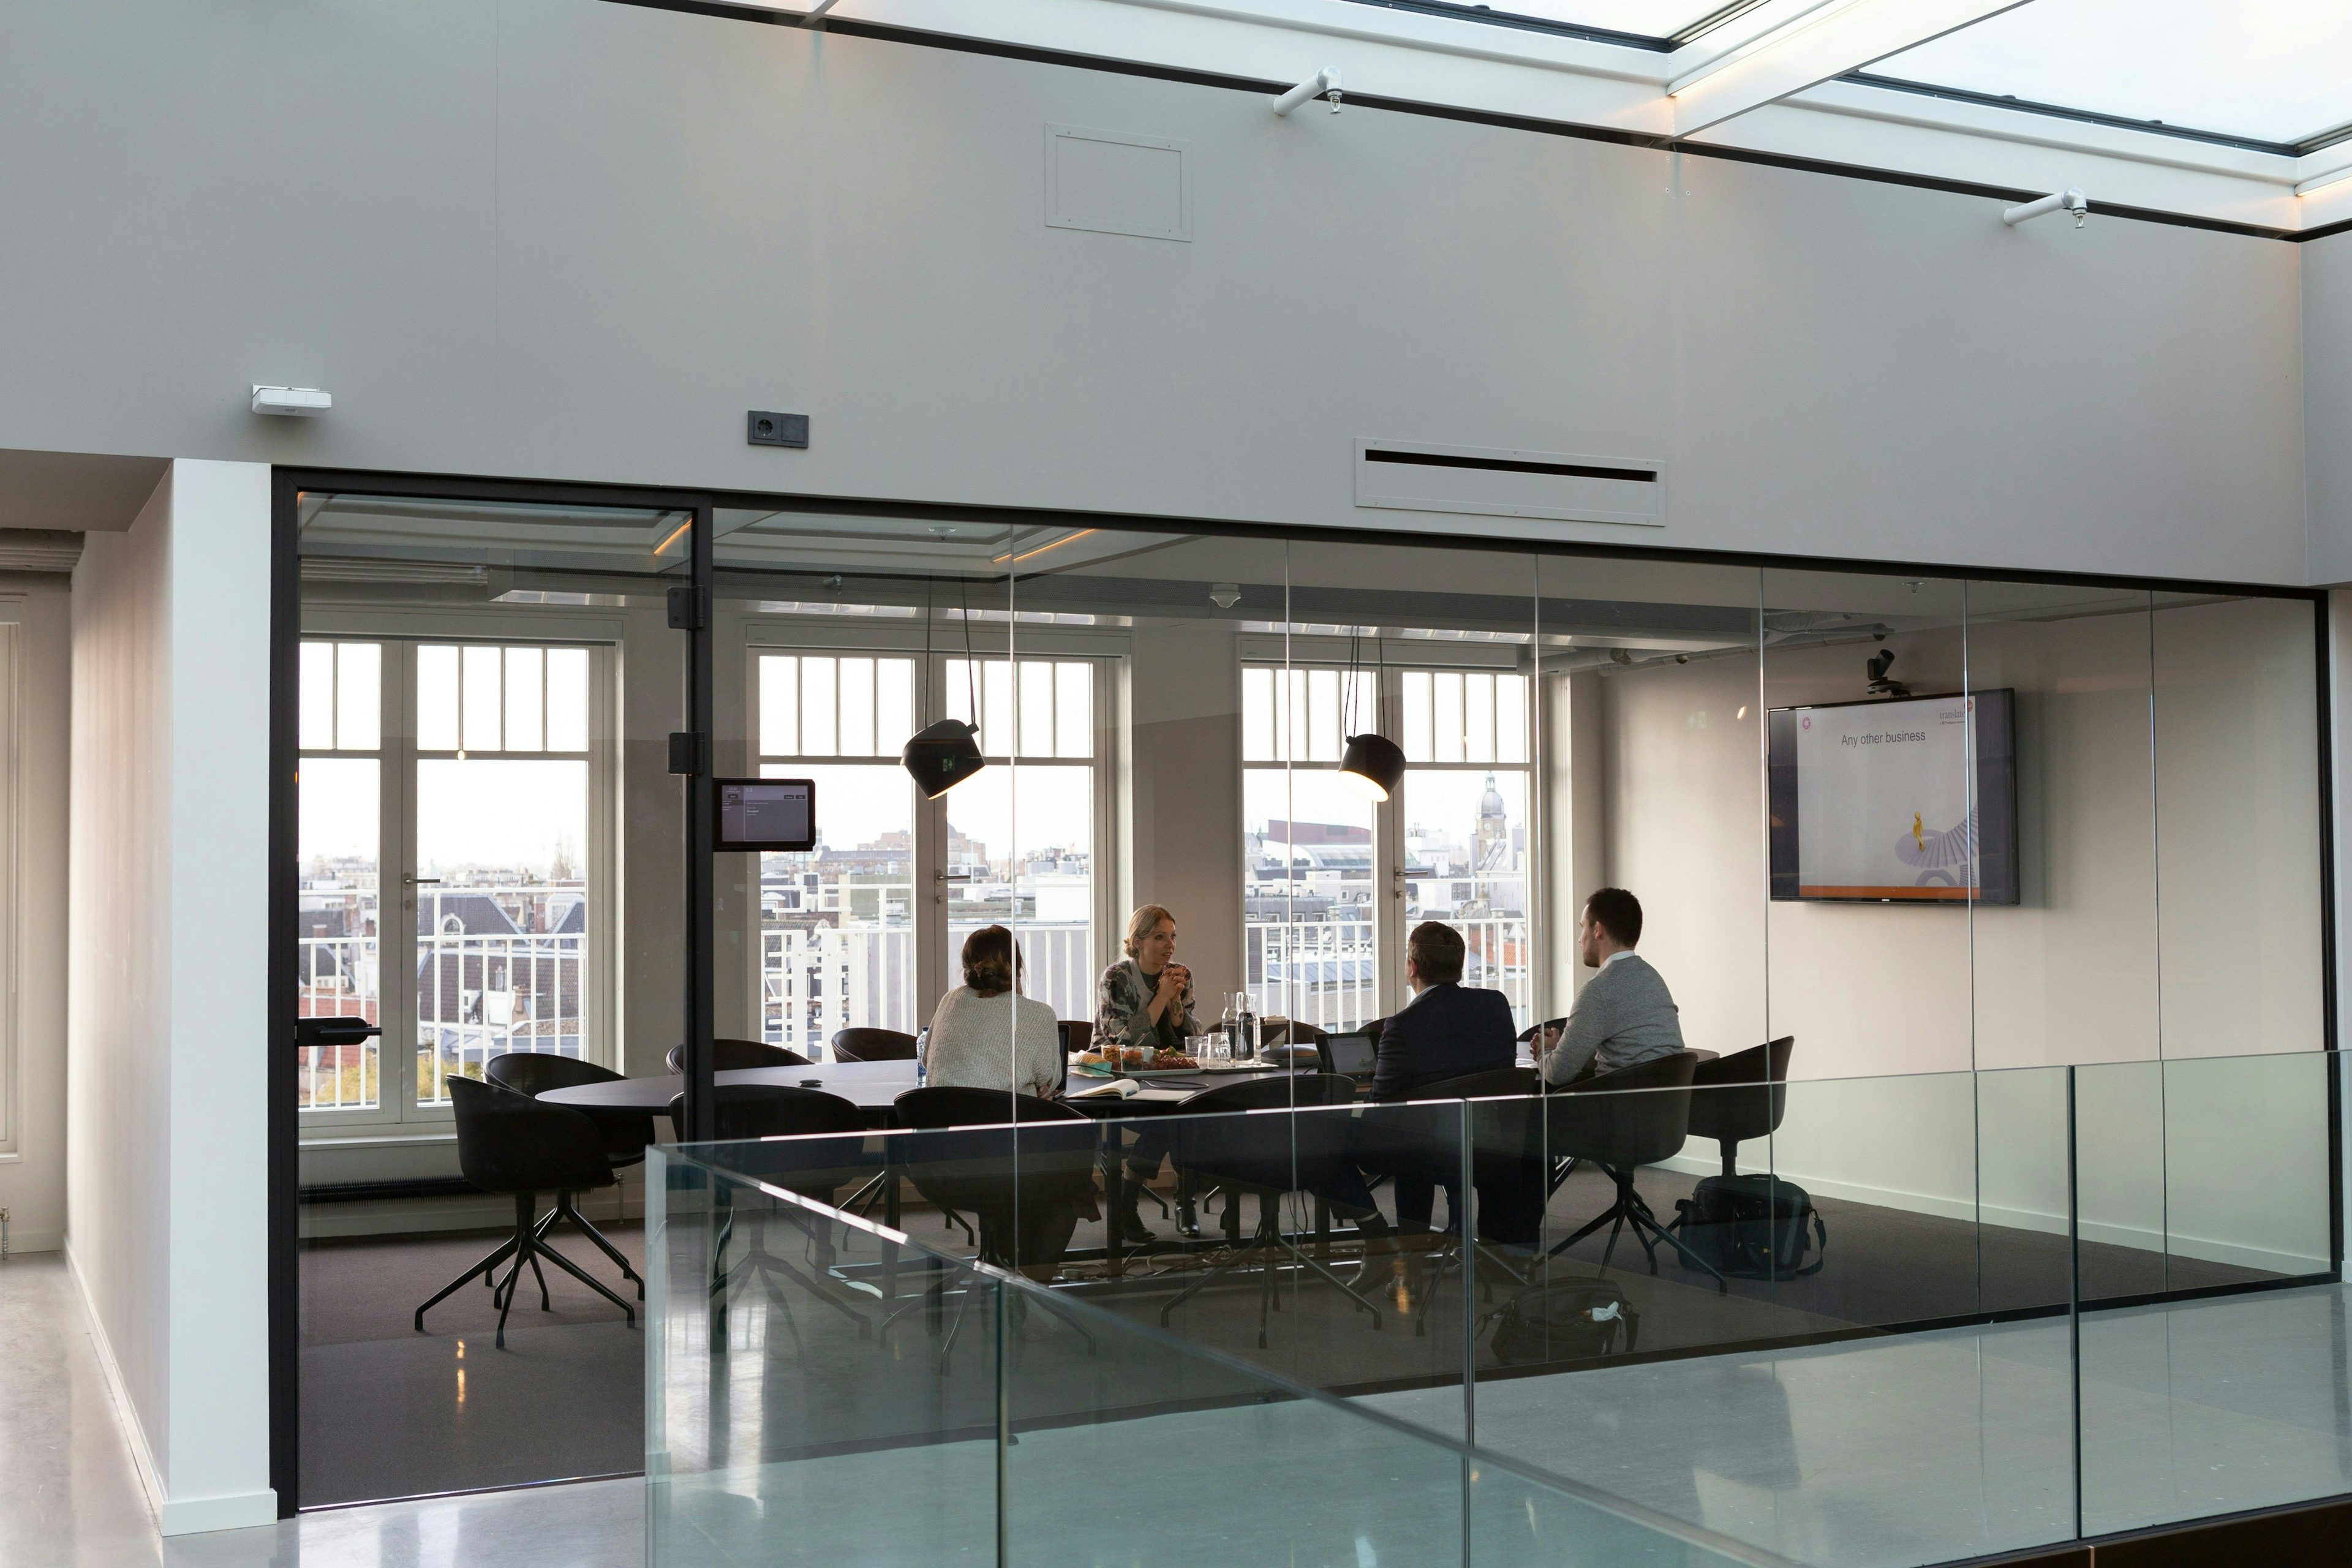 Meeting taking place in a office space